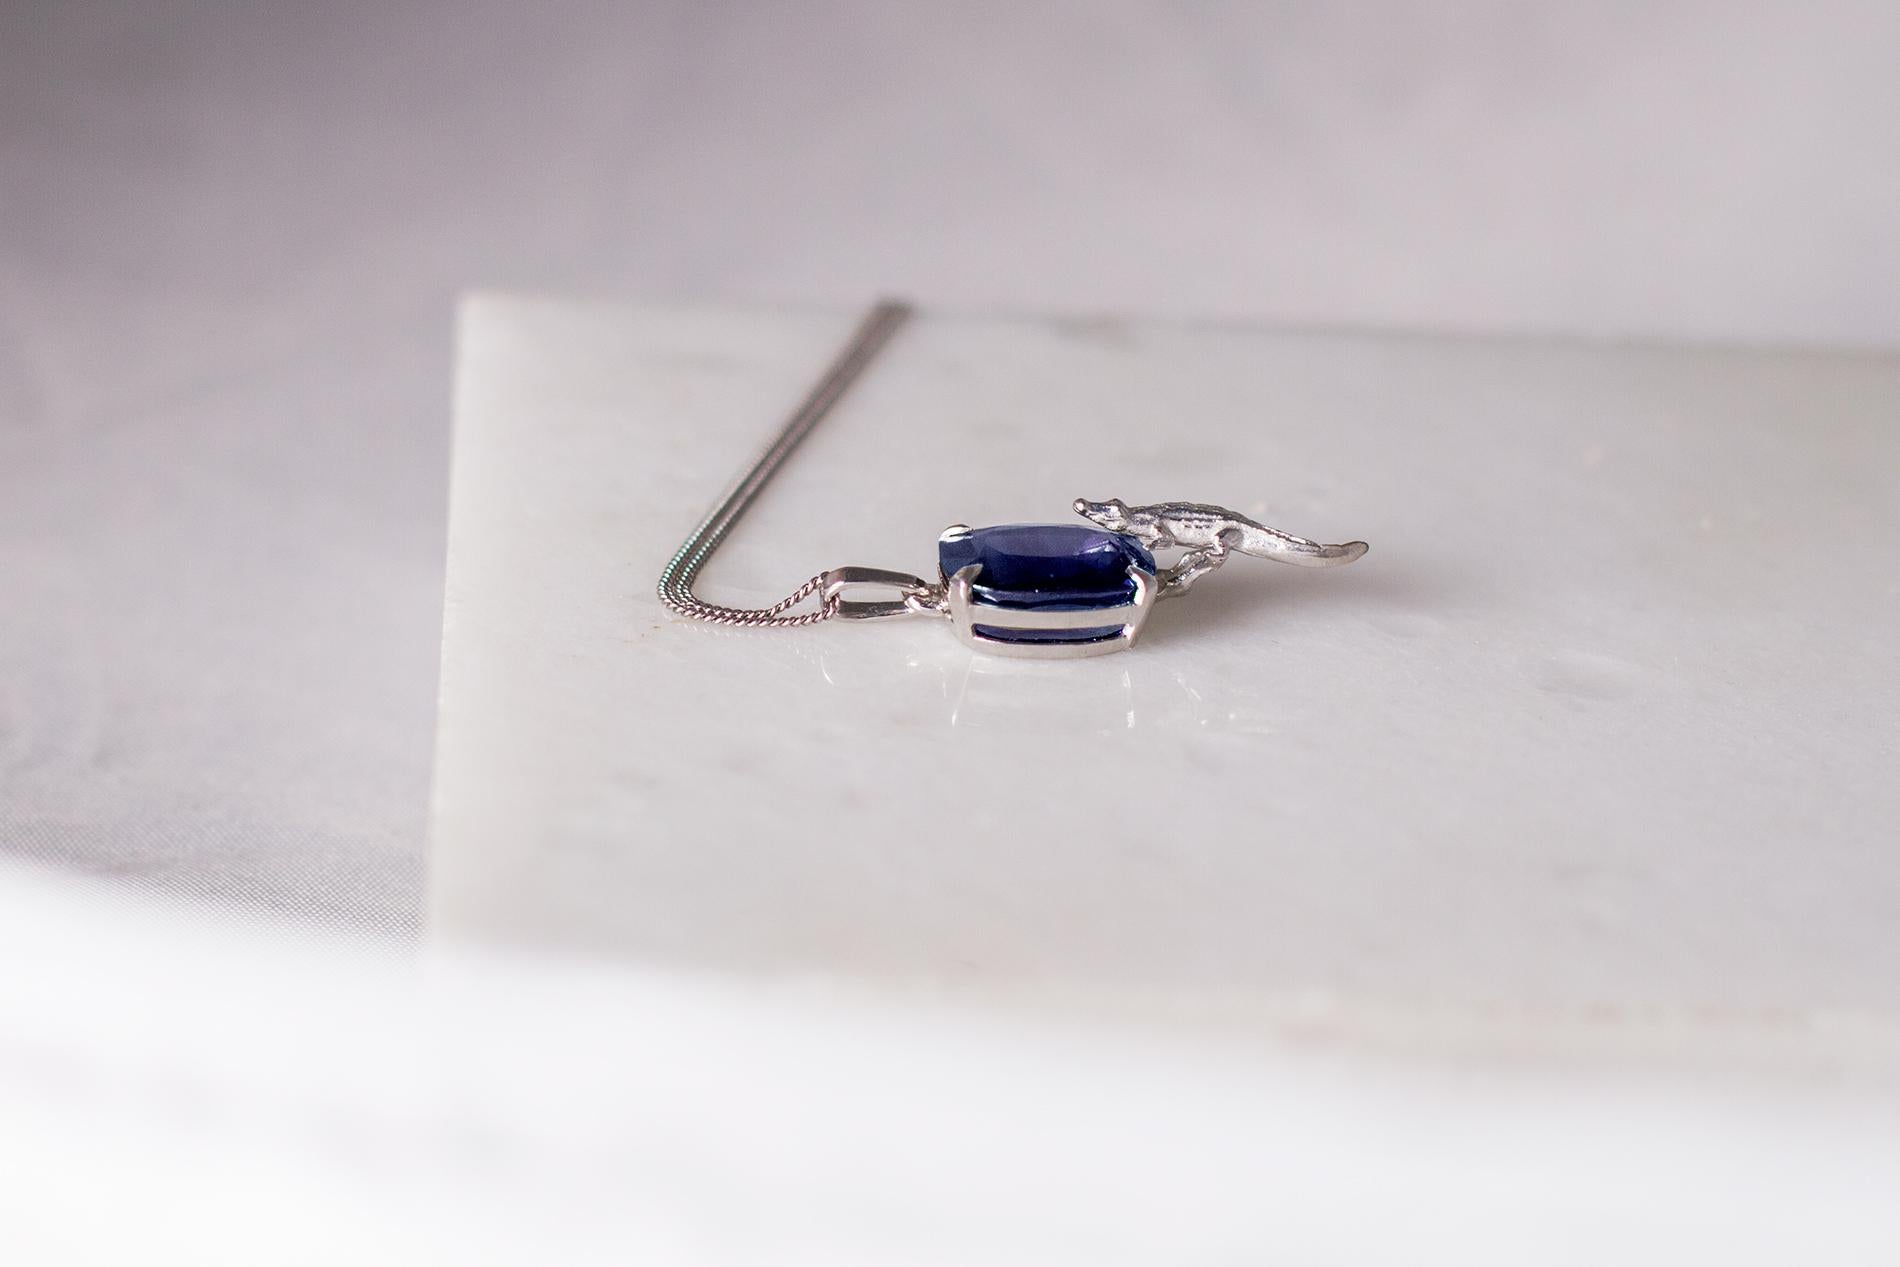 This 18 karat white gold contemporary Mesopotamian pendant necklace is encrusted with 2.14 carats natural cushion tanzanite, 9.3x6.8 mm. The gem catches eye's attention and well designed in contemporary design pendant necklace.

You can order this